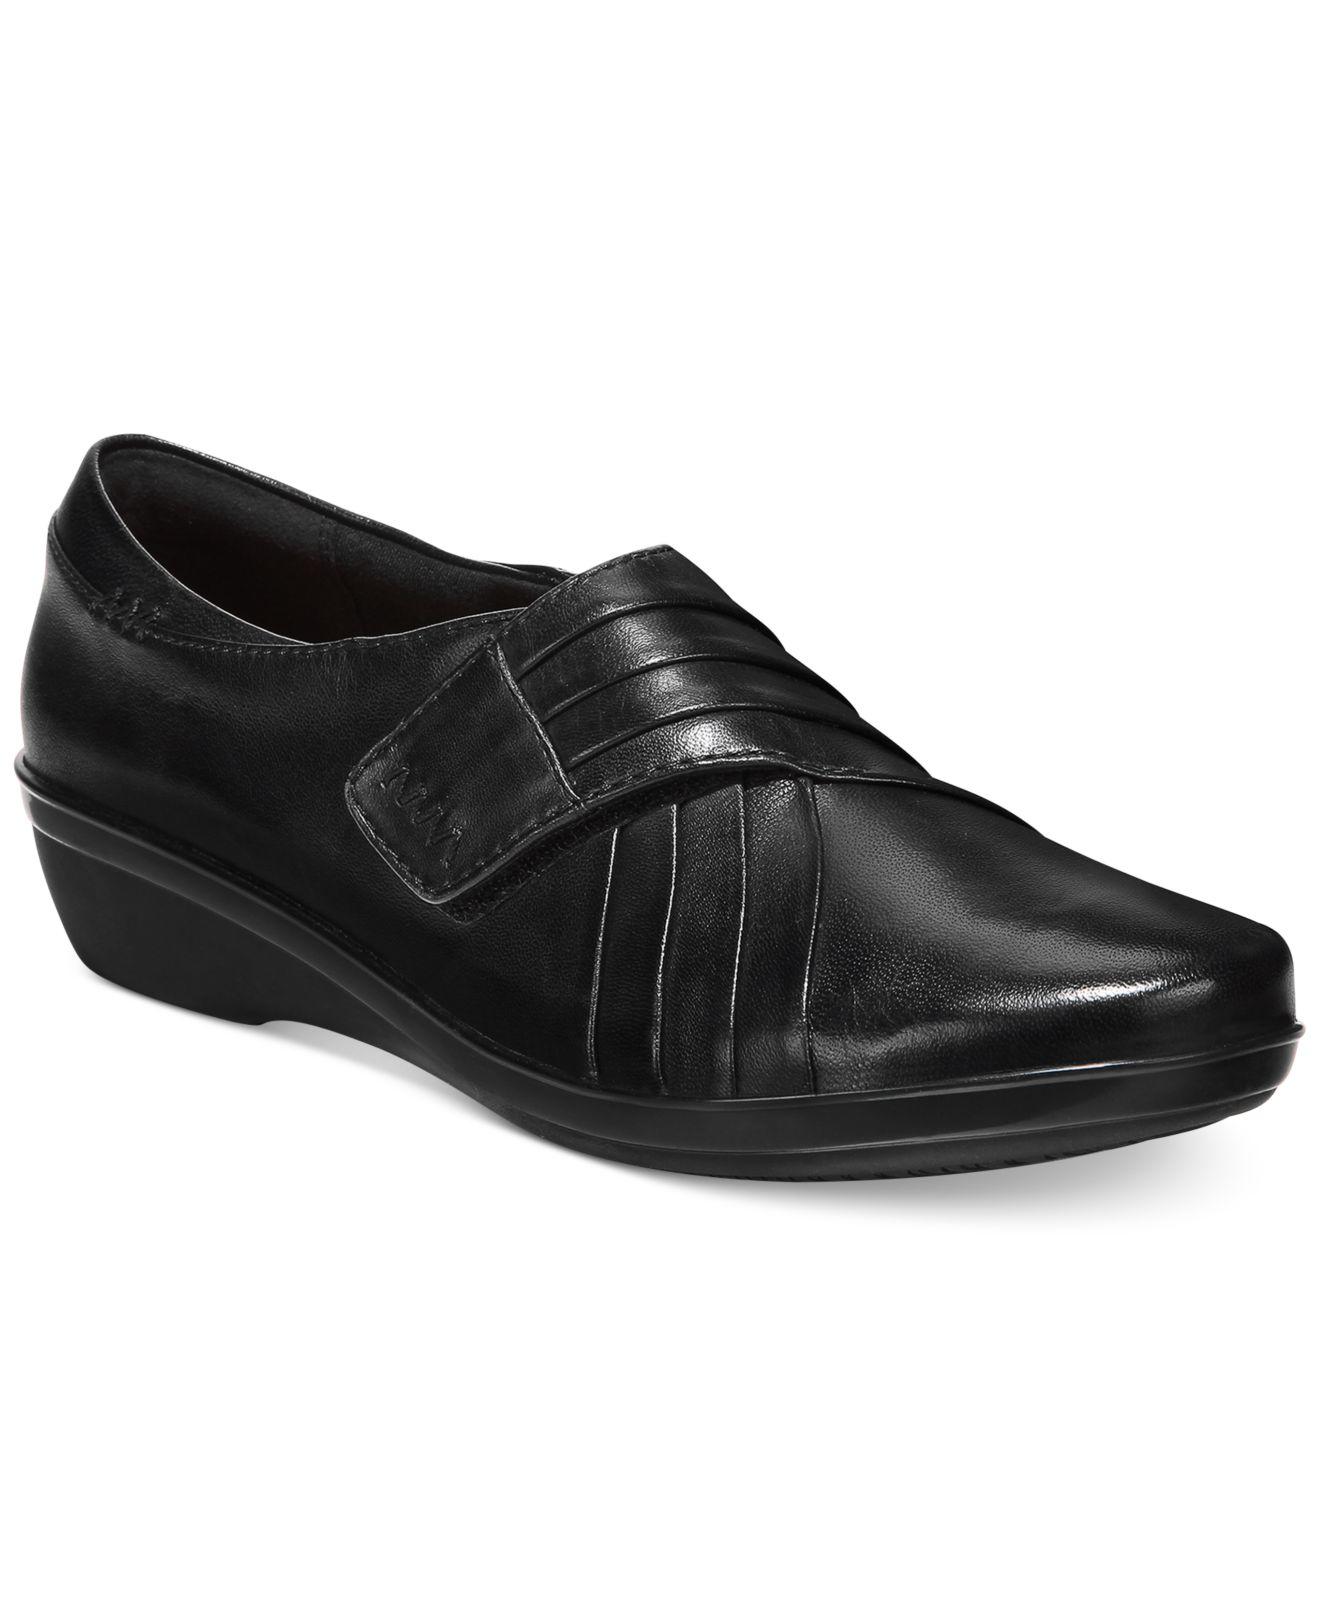 Lyst - Clarks Collection Women's Everlay Drew Flats in Black